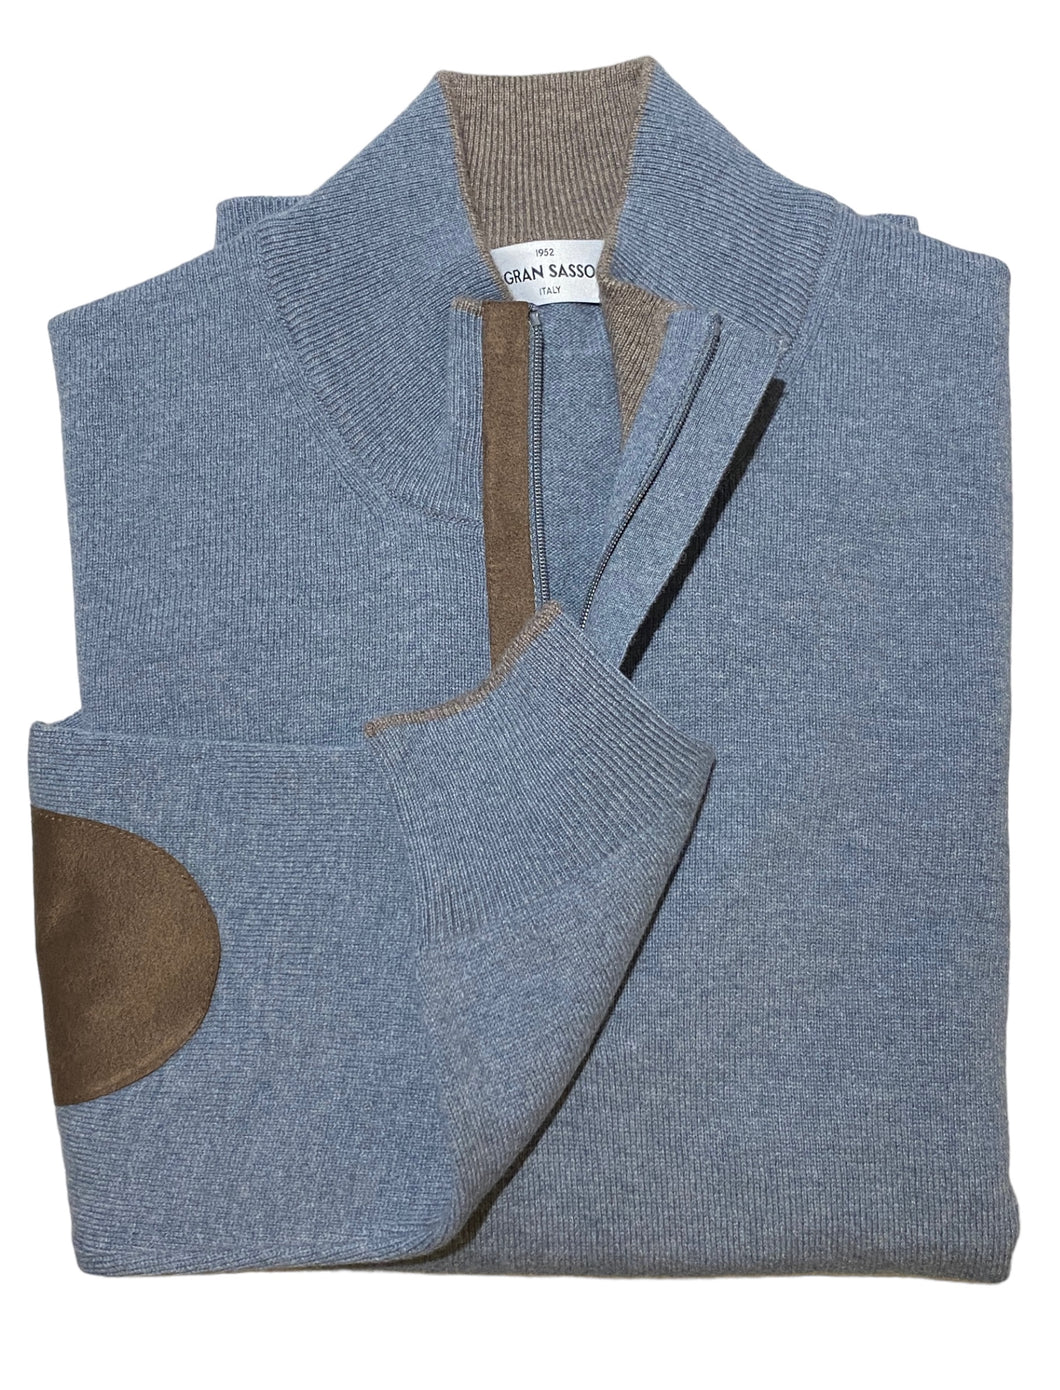 Gran Sasso 1/4 zip Pullover Sweater with Suede Sky